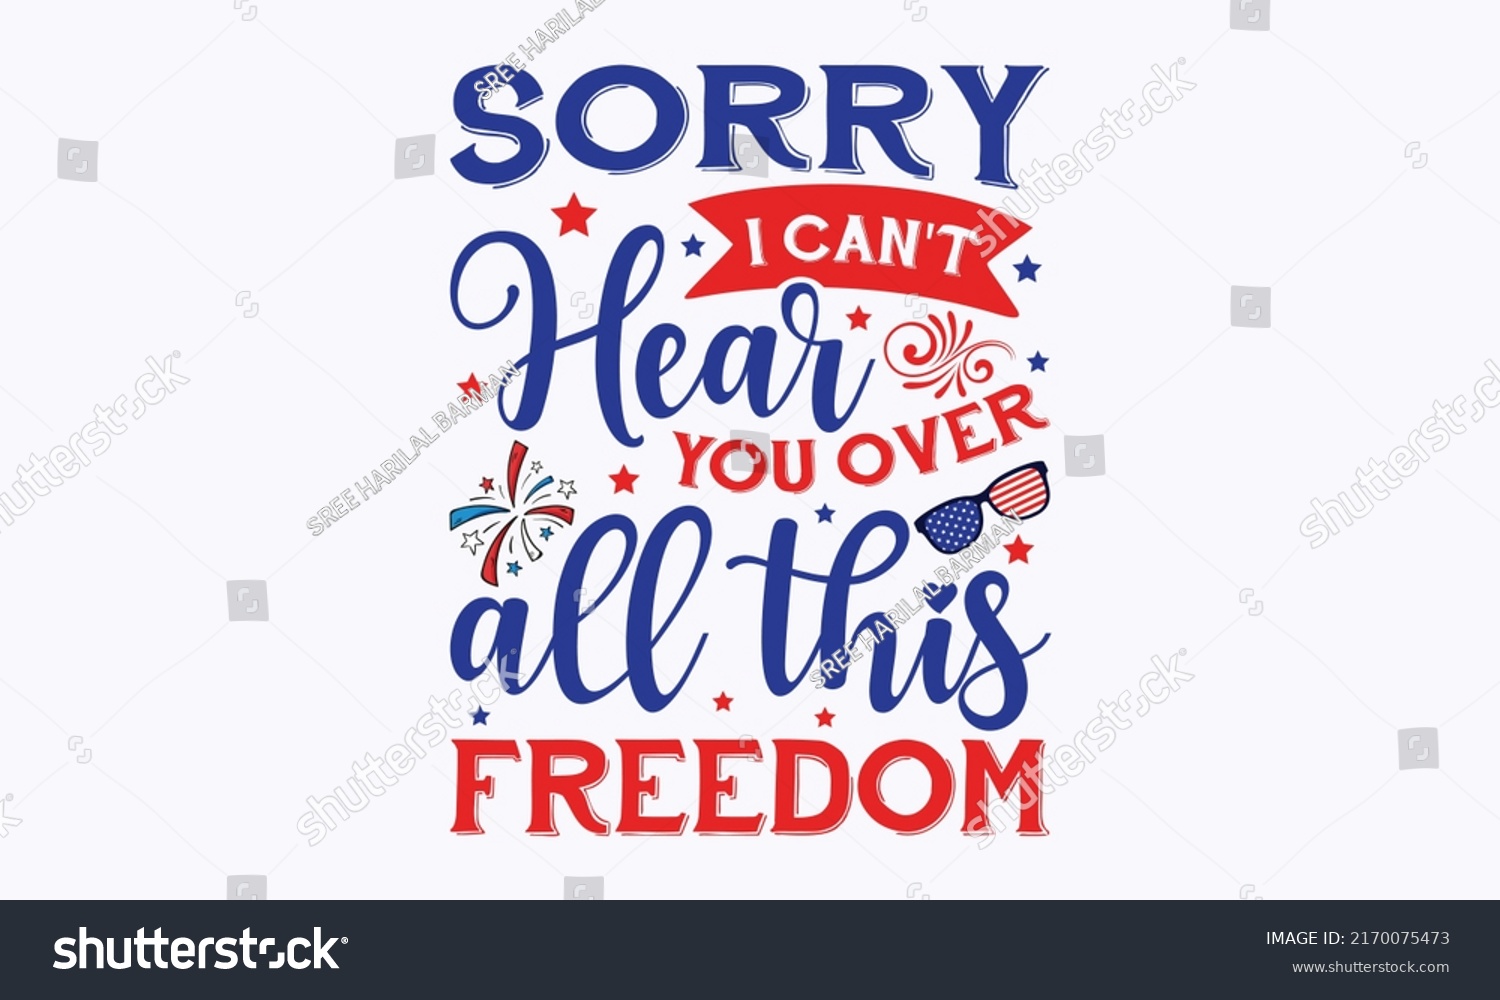 SVG of sorry i can't hear you over all this freedom -  4th of July fireworks svg for design shirt and scrapbooking. Good for advertising, poster, announcement, invitation, Templet svg